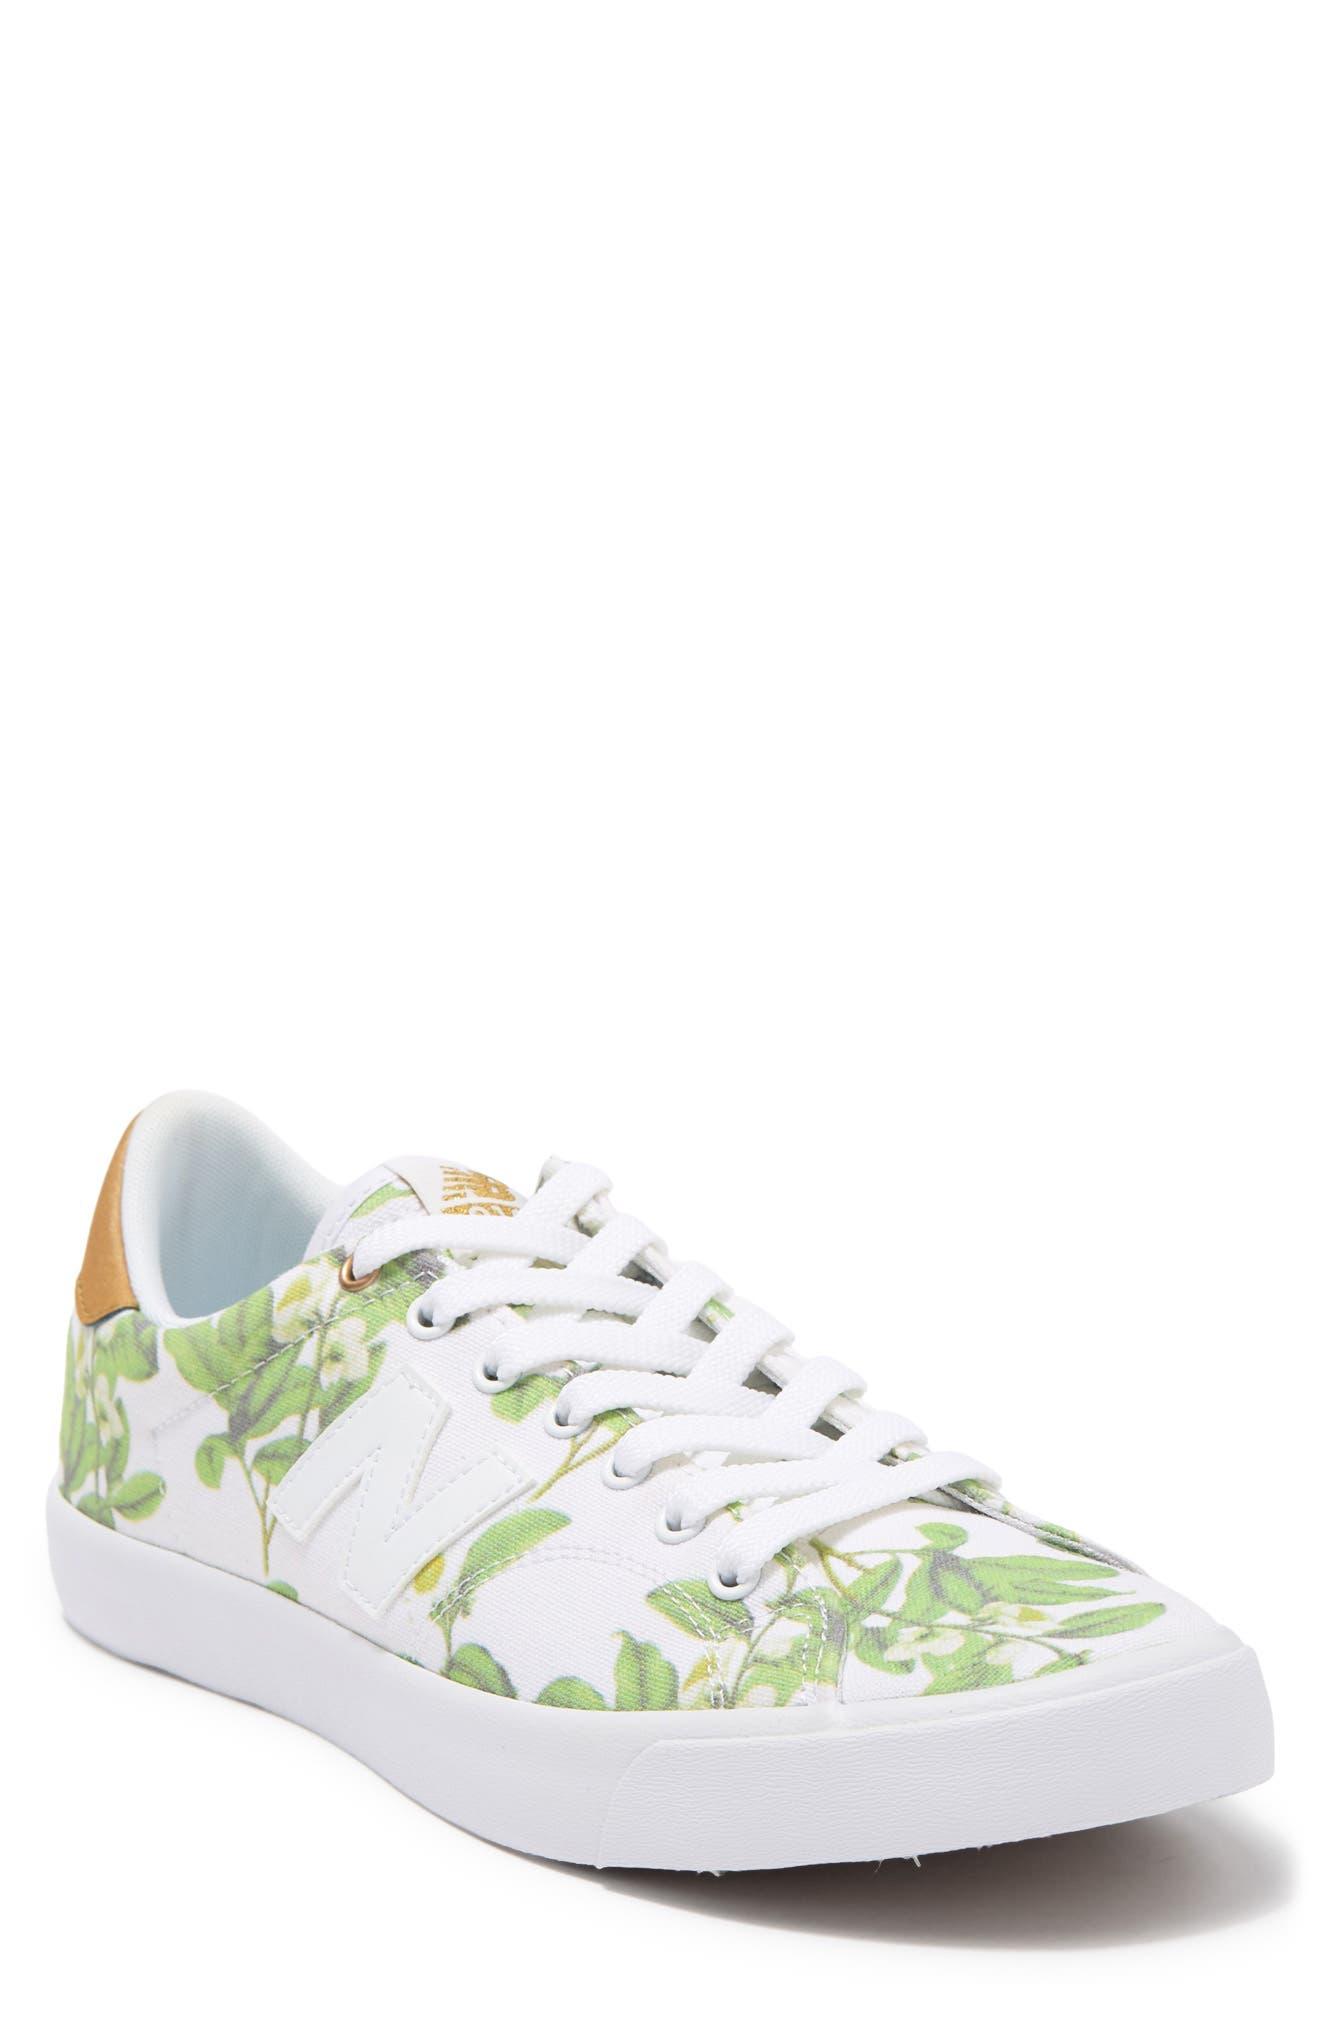 New Balance 210 Floral Canvas Skate Shoe In White/gree At Nordstrom Rack  for Men | Lyst